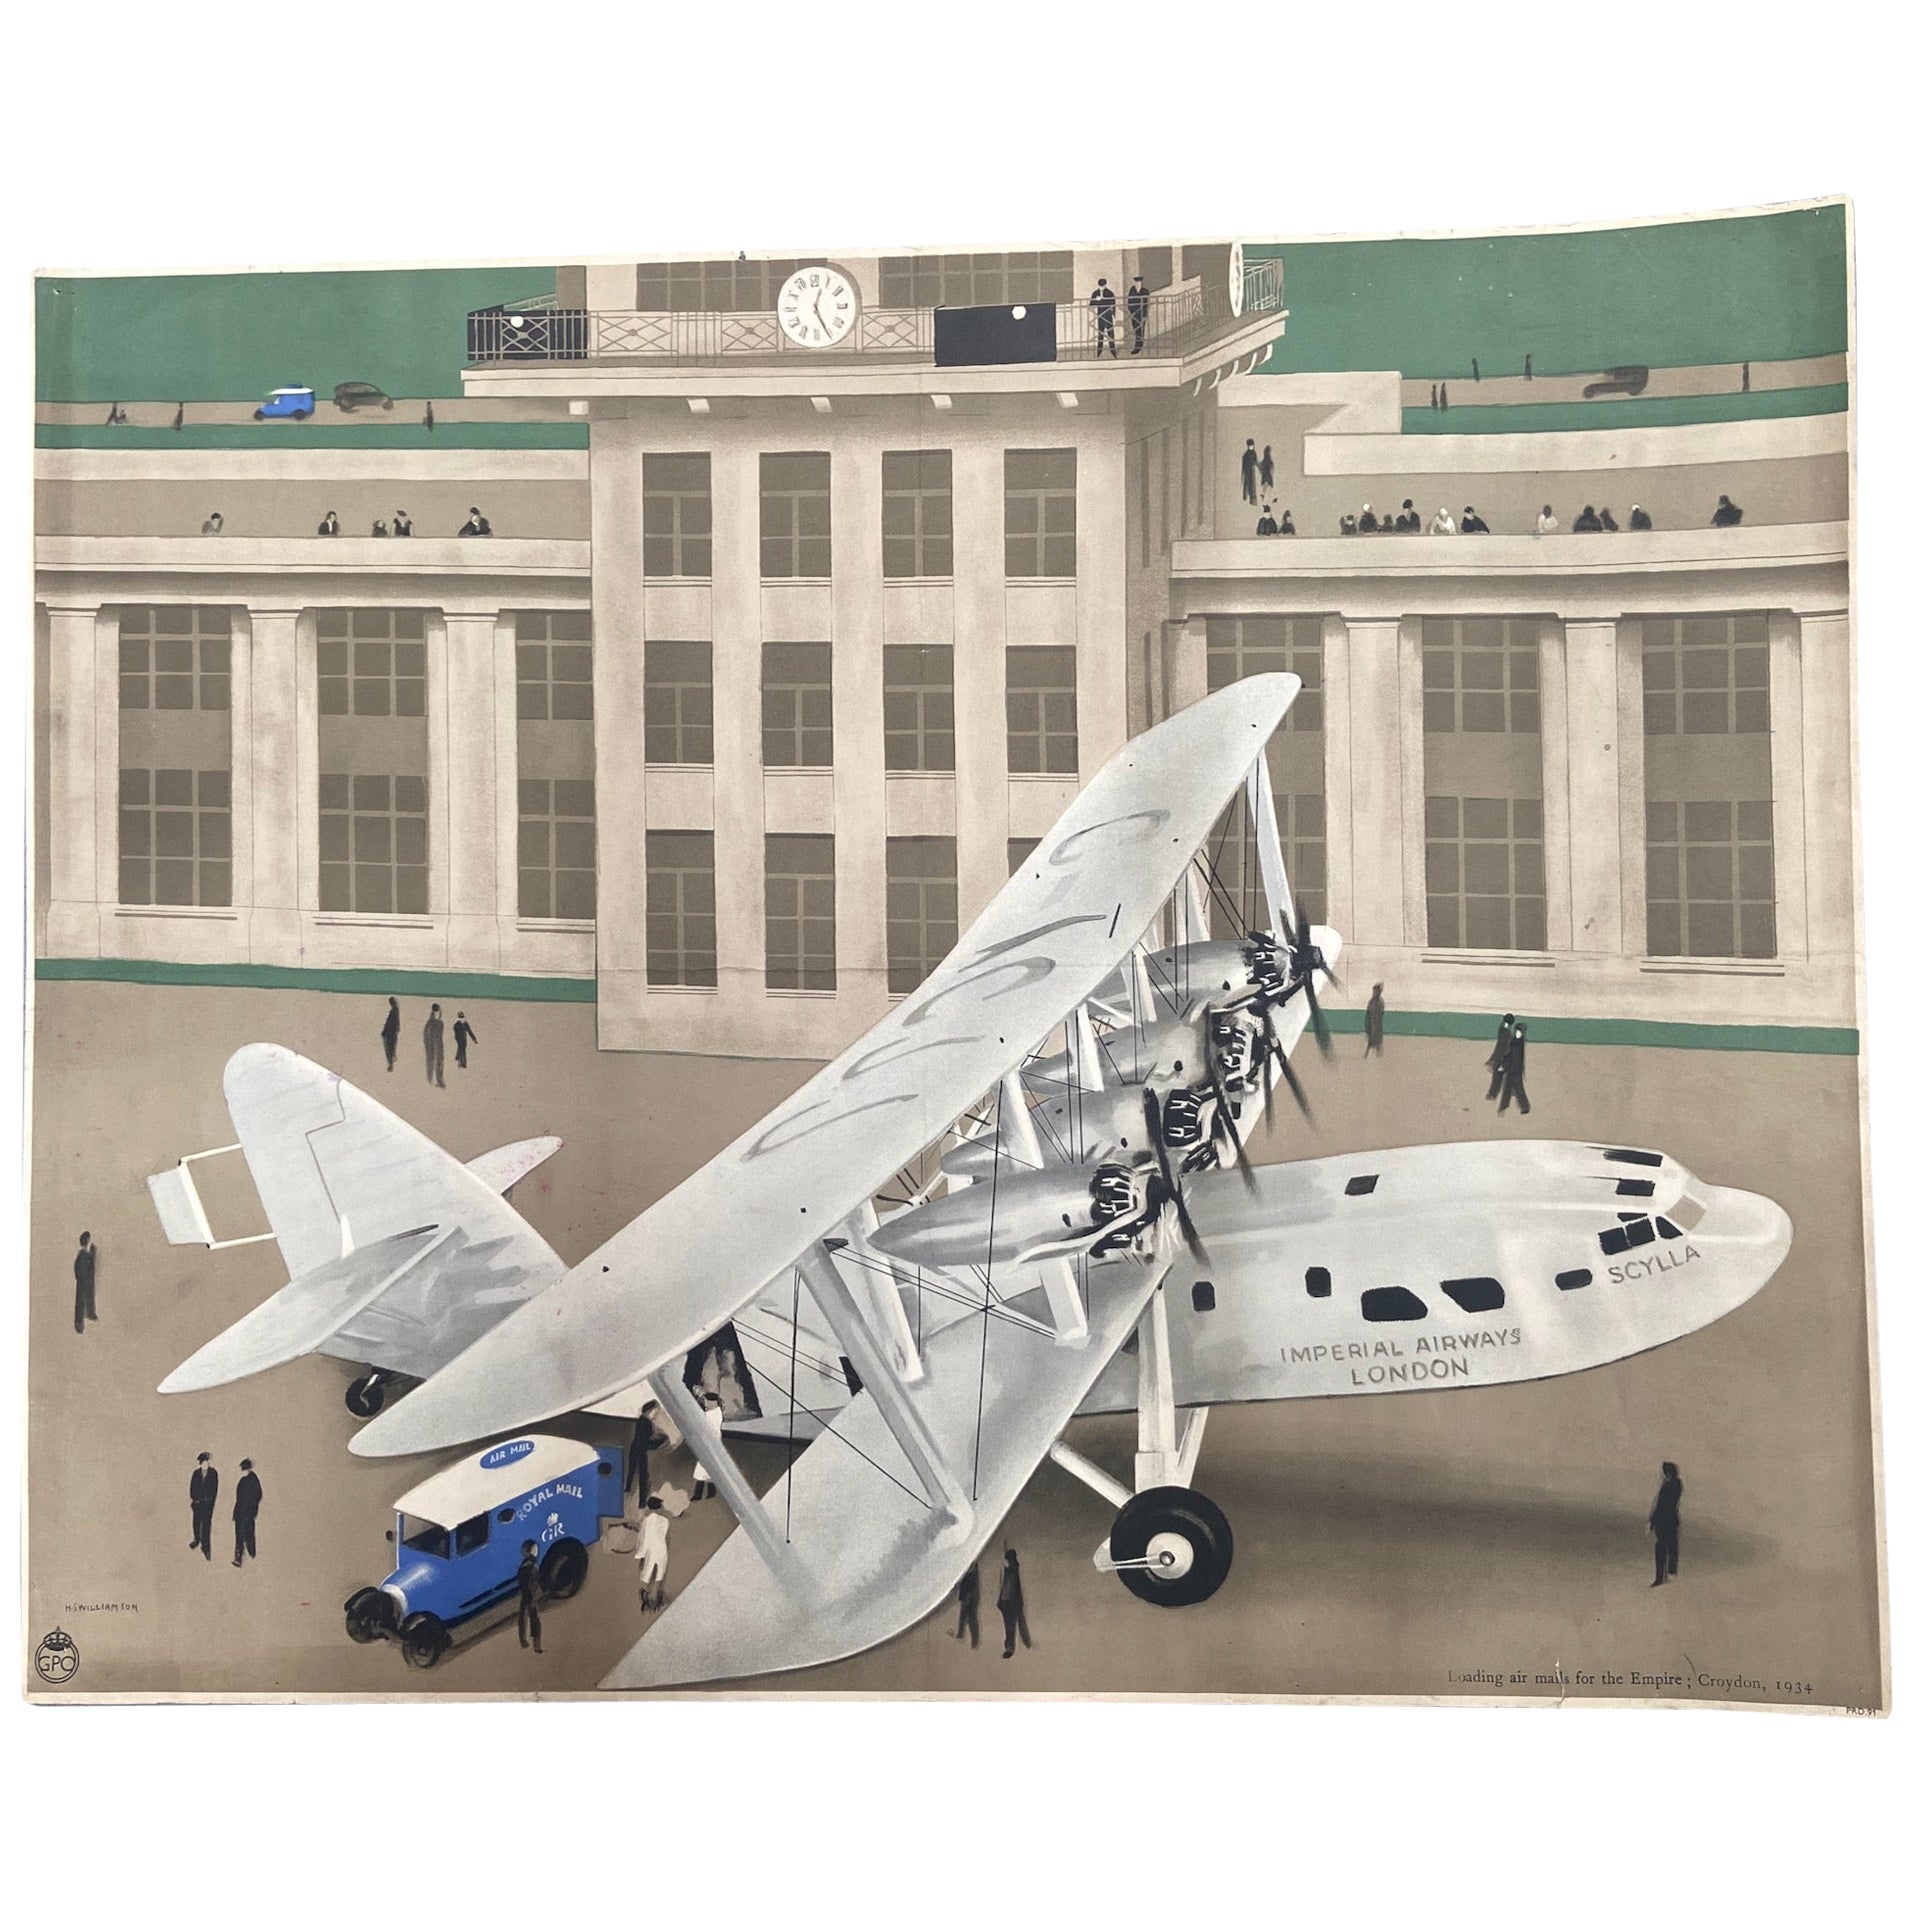 Imperial airways GPO poster by H S Williamson, original 1934 coloured lithograph For Sale